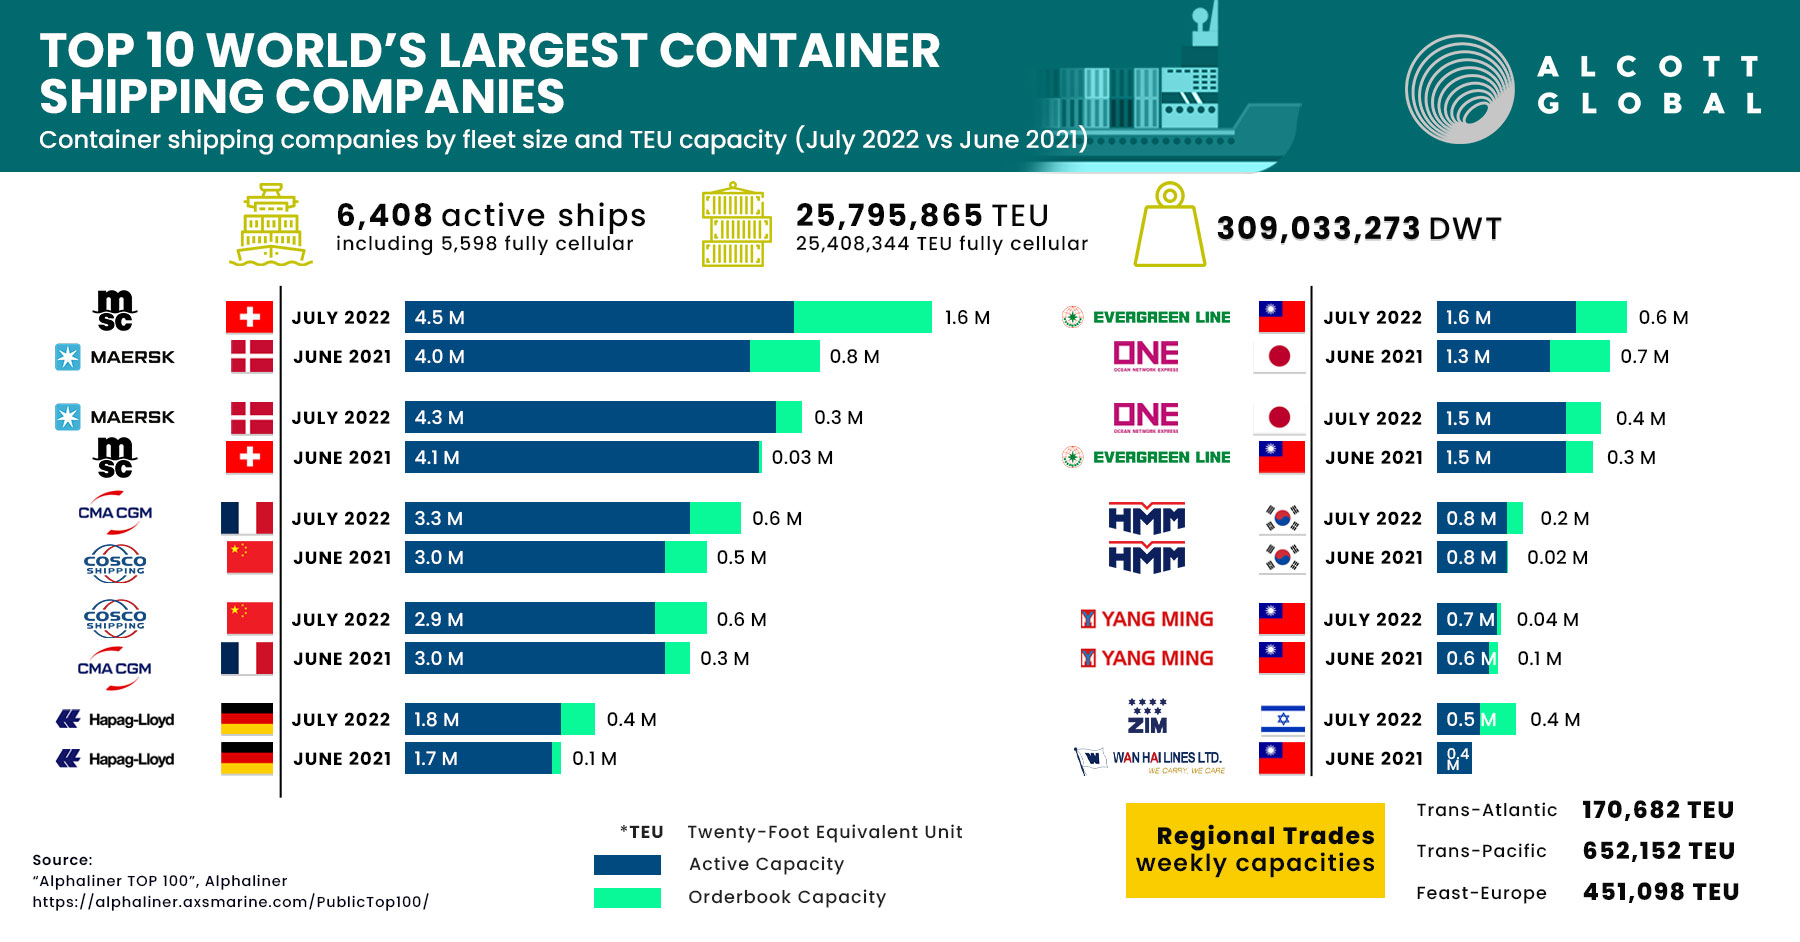 Top 10 World's Largest Container Shipping Companies - July 2022 Update